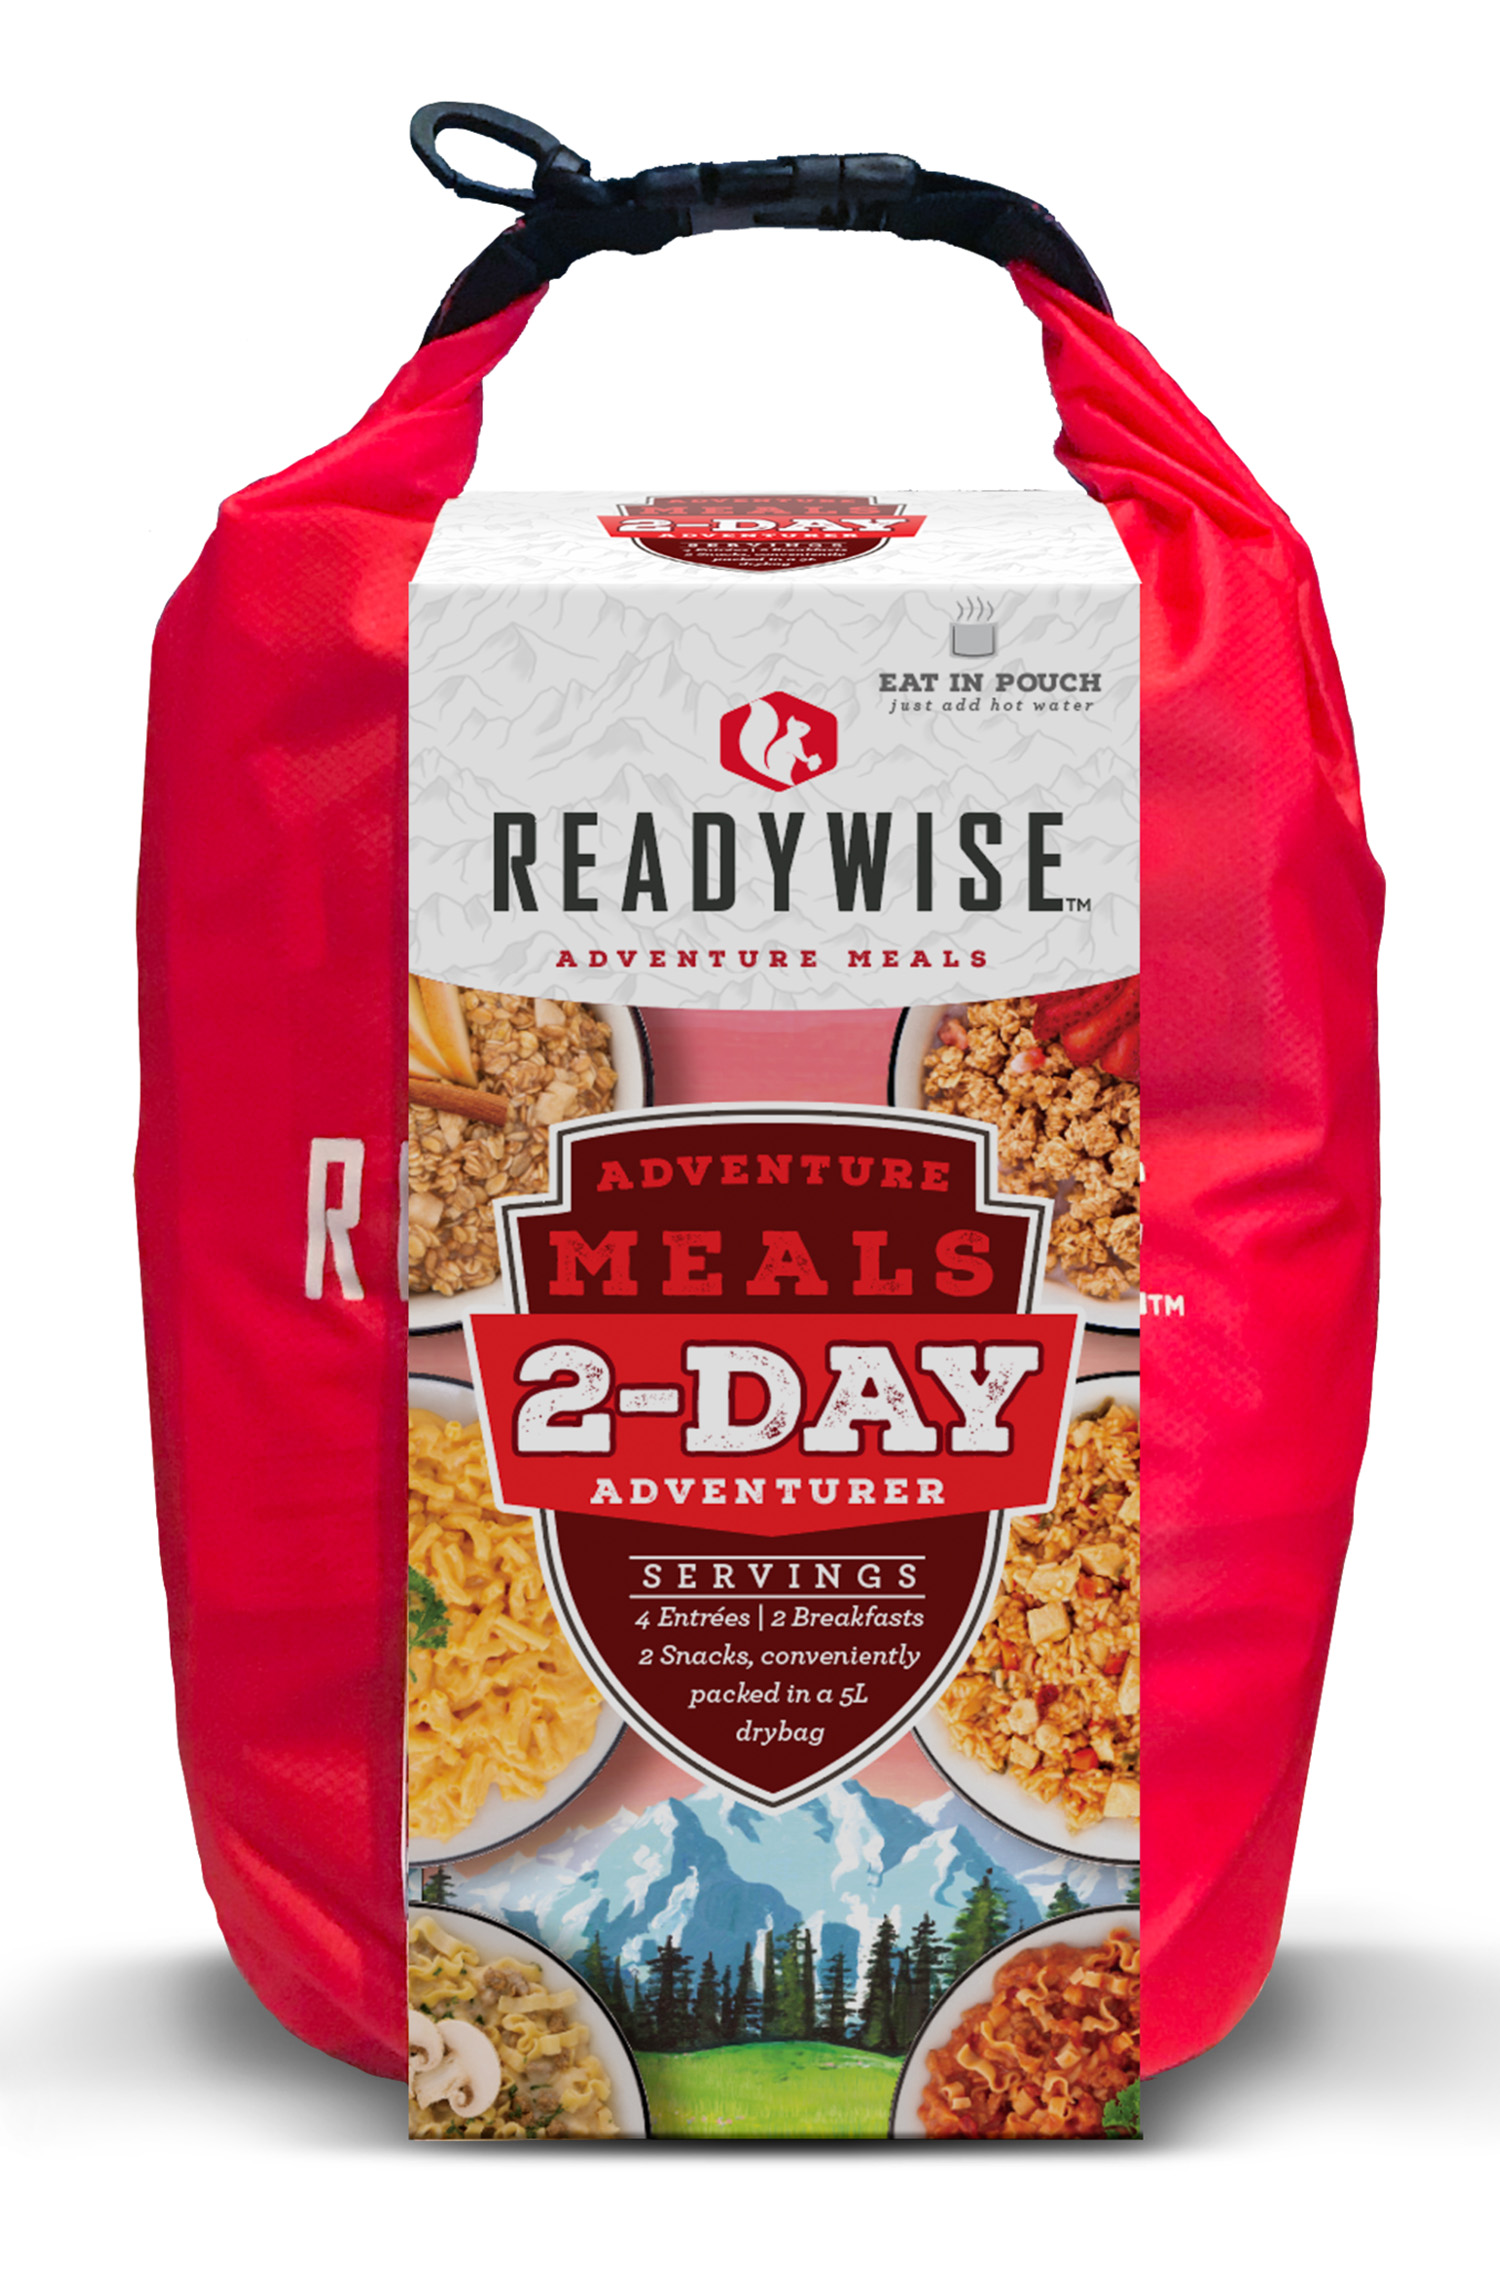 ReadyWise RW05919 Outdoor Food Kit 2 Day Adventure Pack w/Dry Bag Includes 4 Entrees, 2 Breakfasts and 2 Snacks